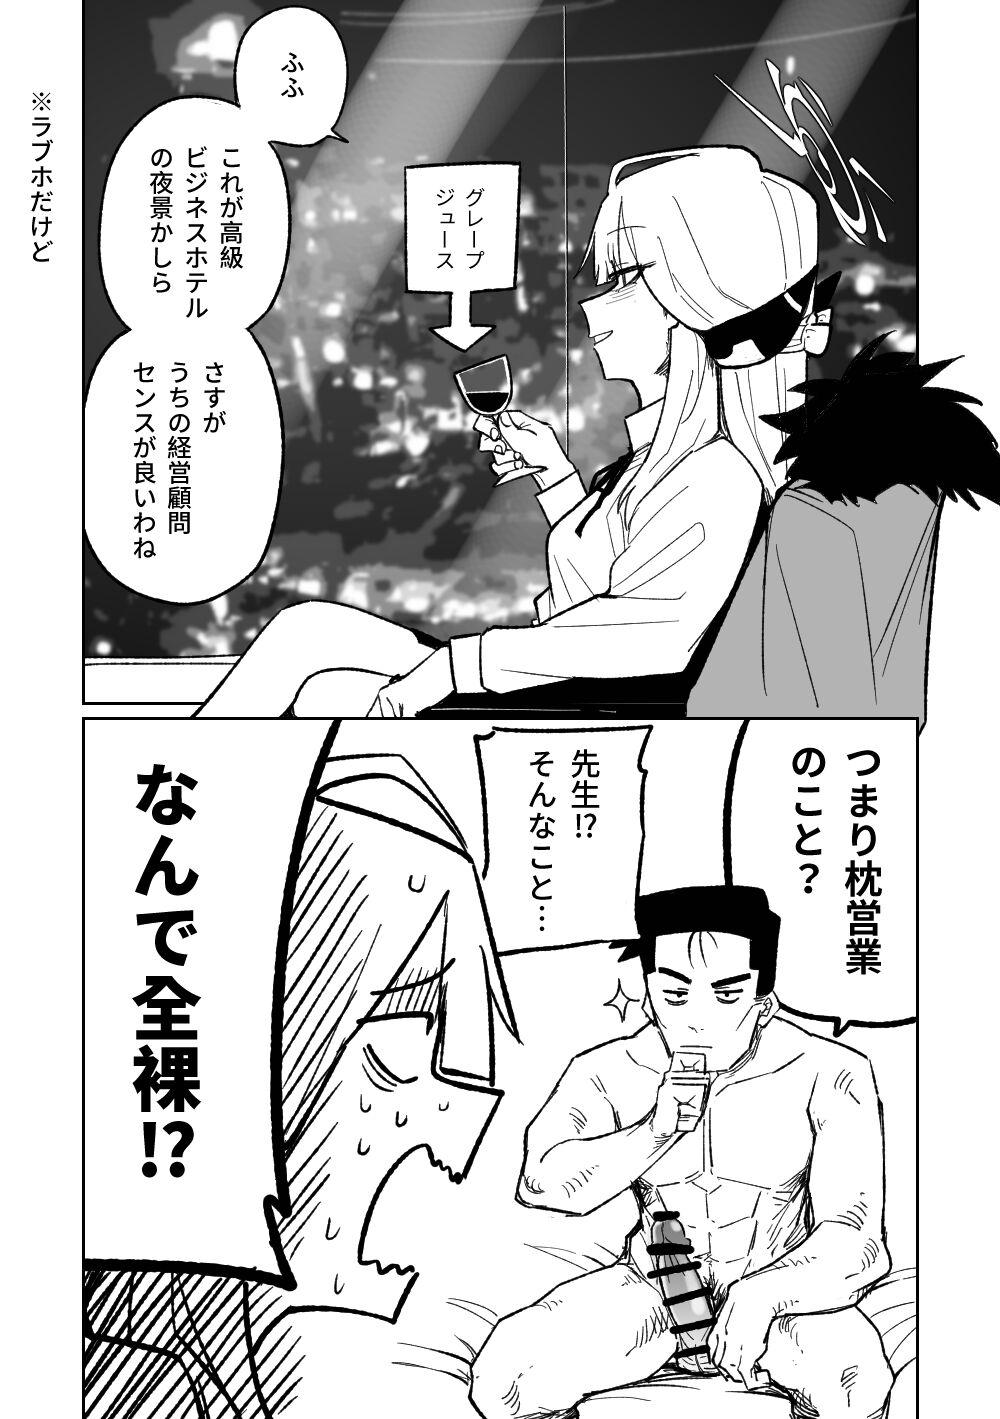 Big Black Dick 社長とビジネスホテル（12p） - Blue archive Gets - Page 2